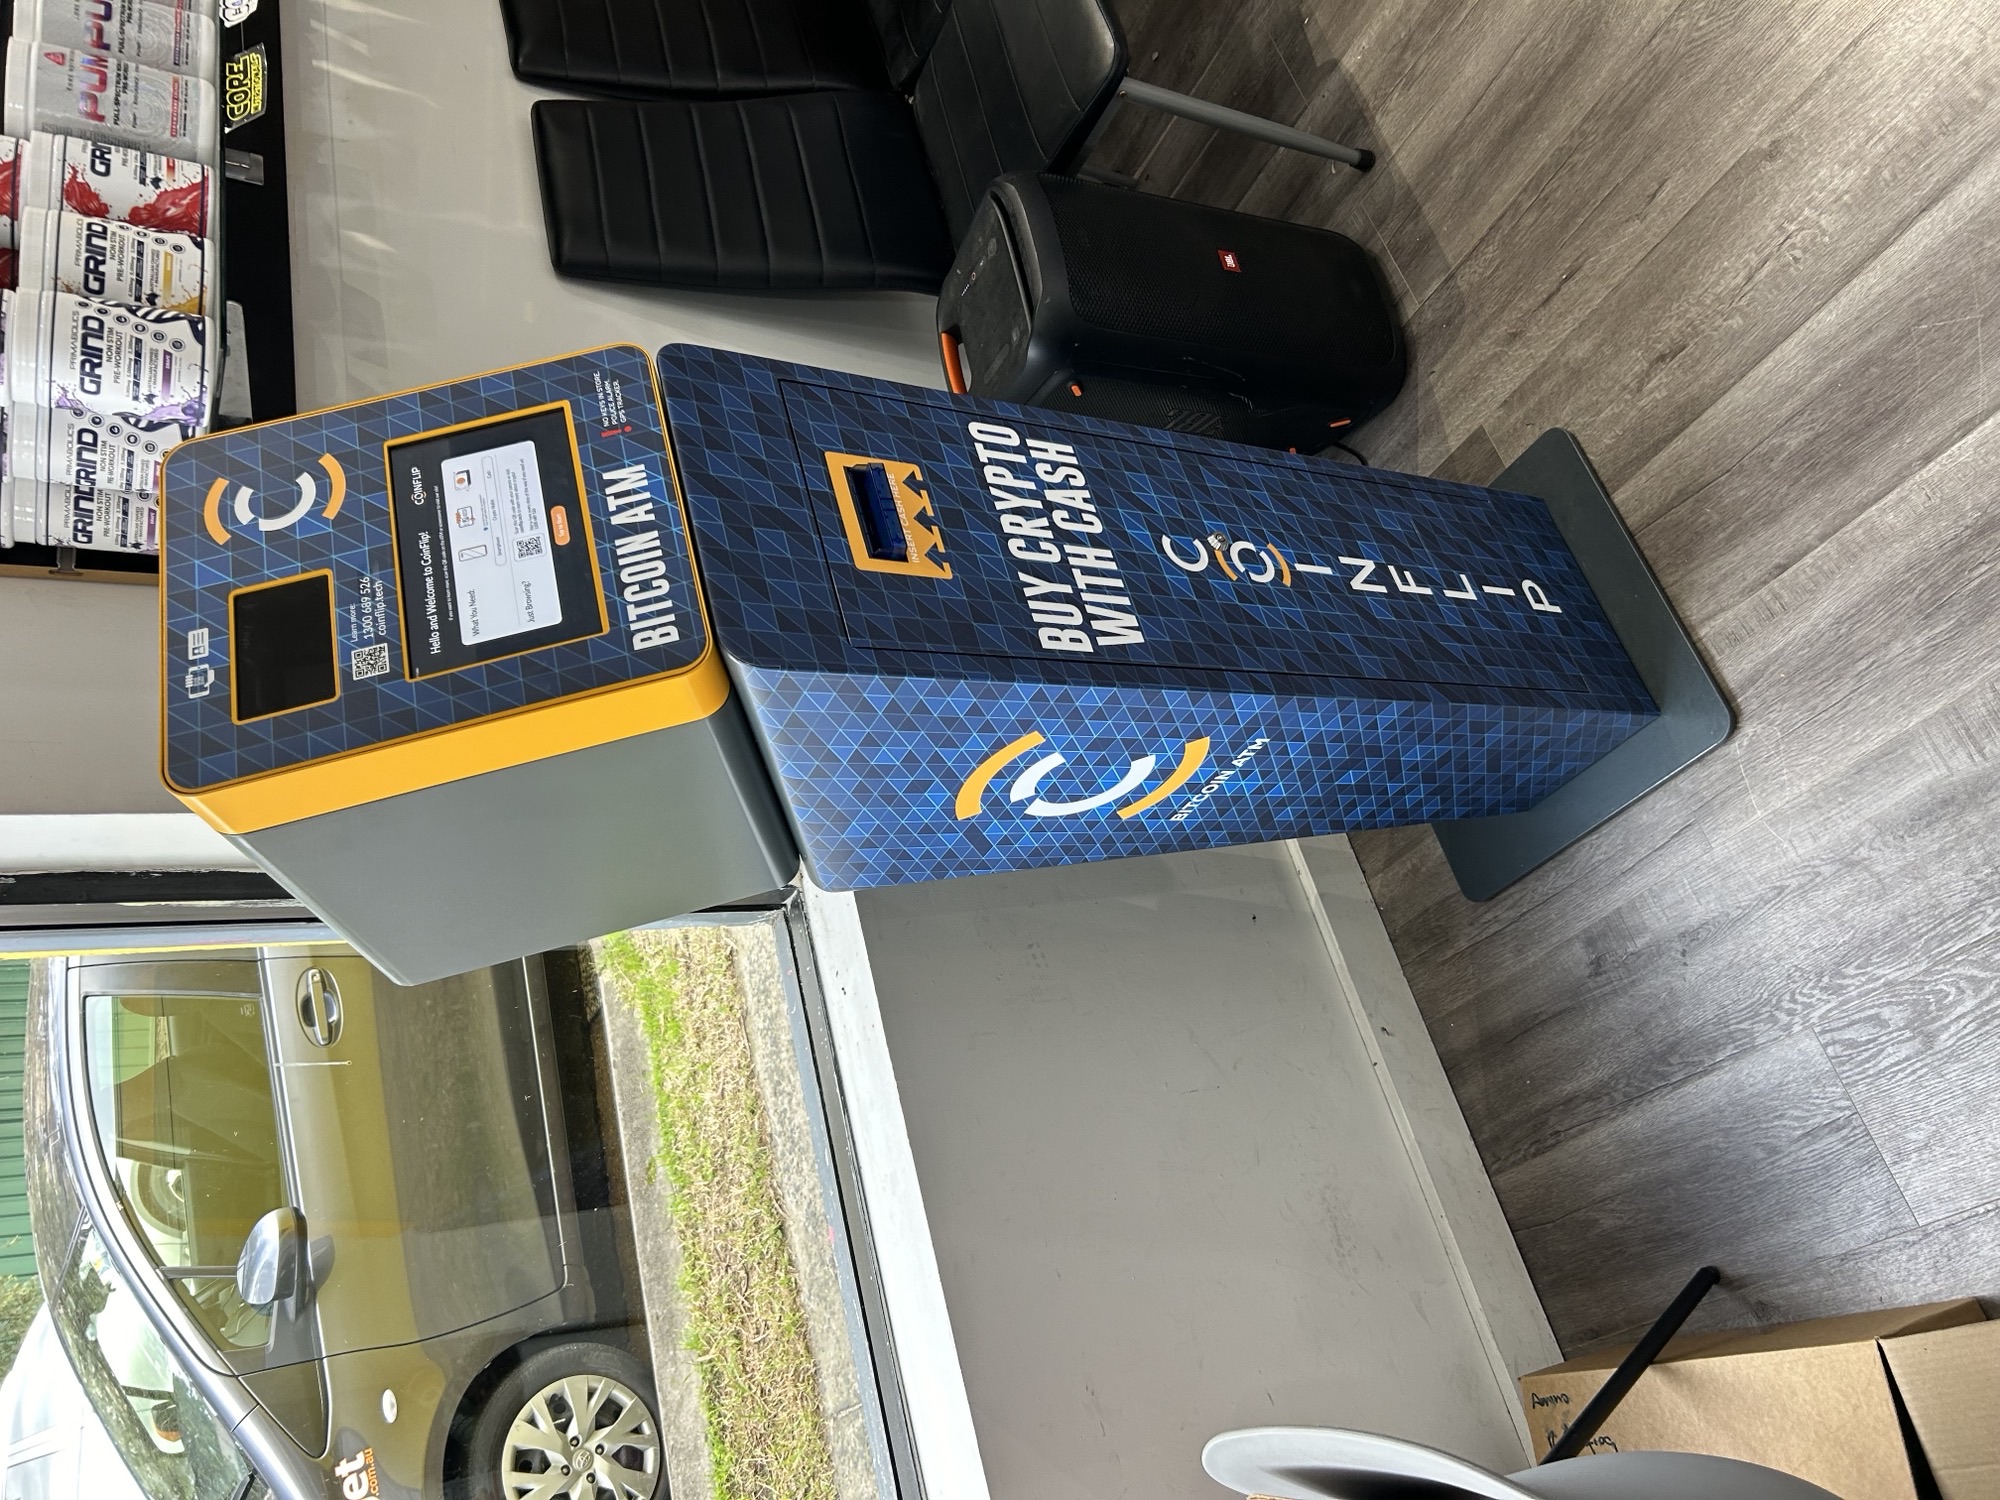 CoinFlip Bitcoin ATM - Hoppers Laundromat (Hoppers Crossing) Hoppers Crossing (13) 0068 9526